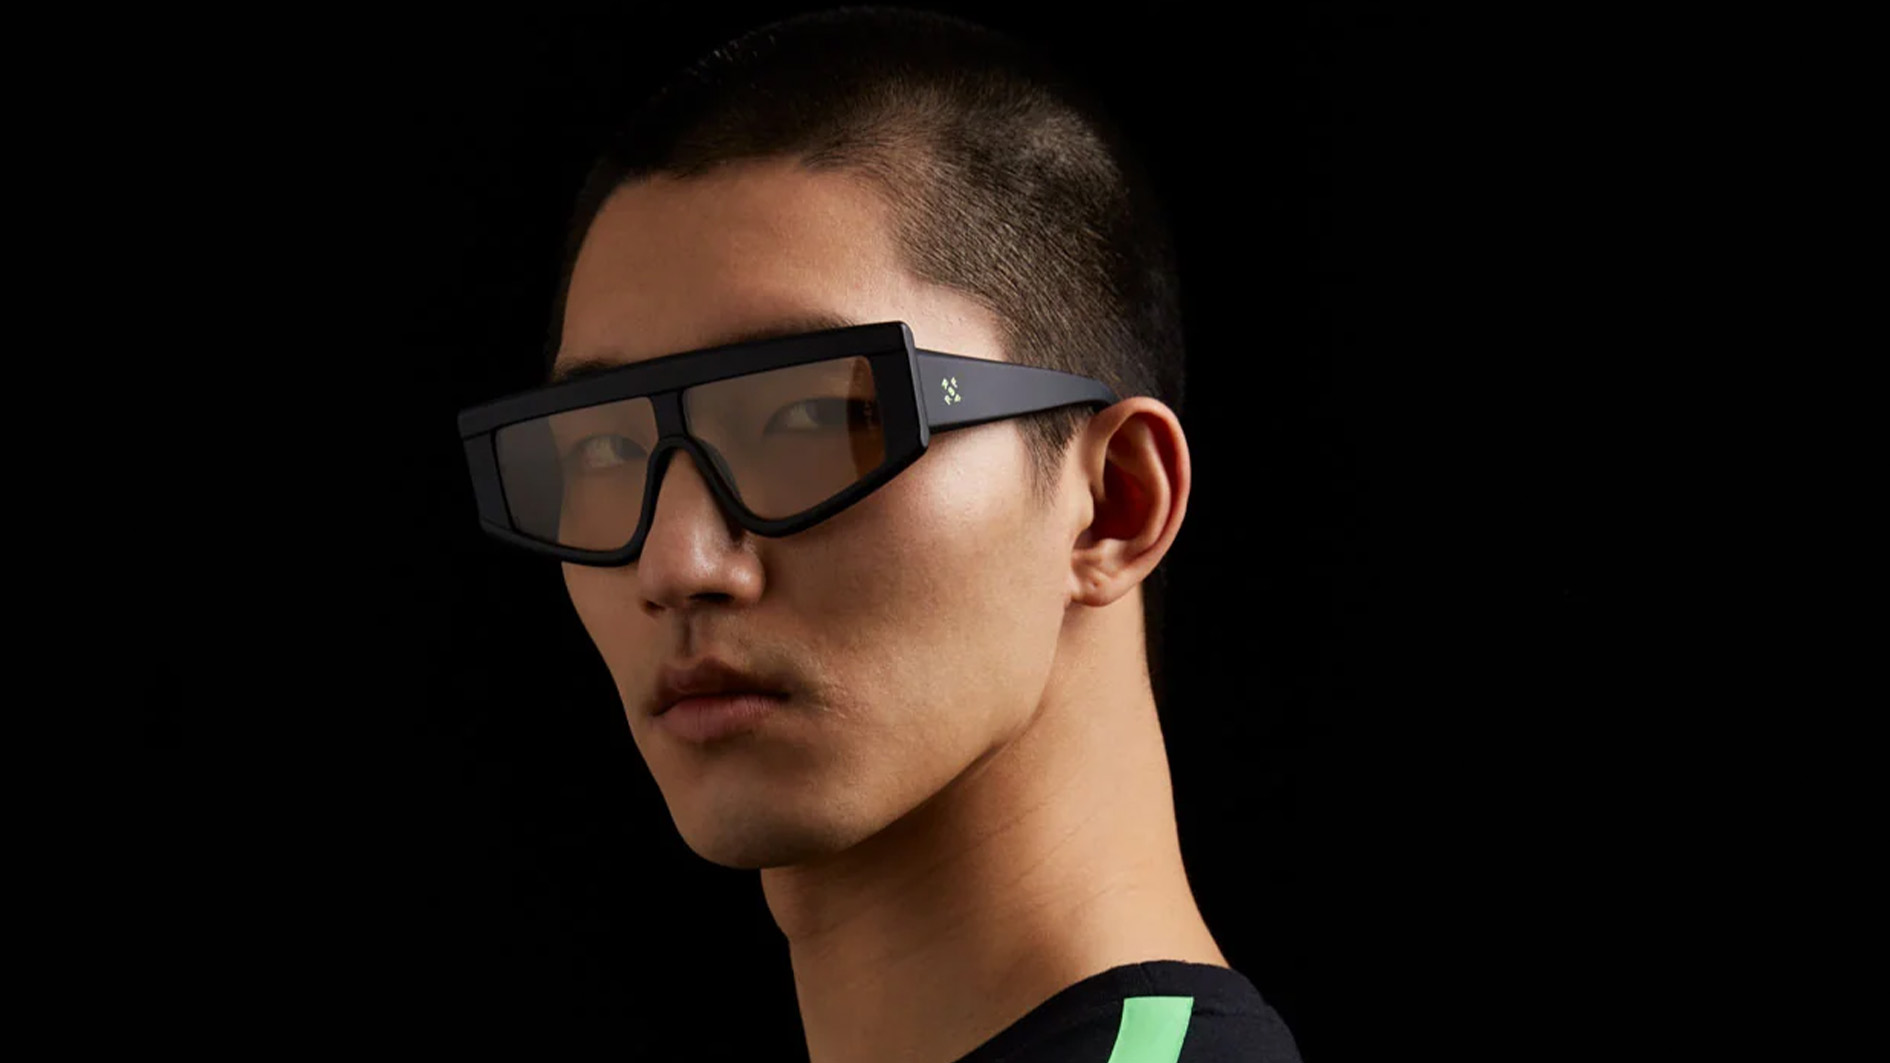  Razer makes sunglasses now, and no, they don't have RGB lighting 